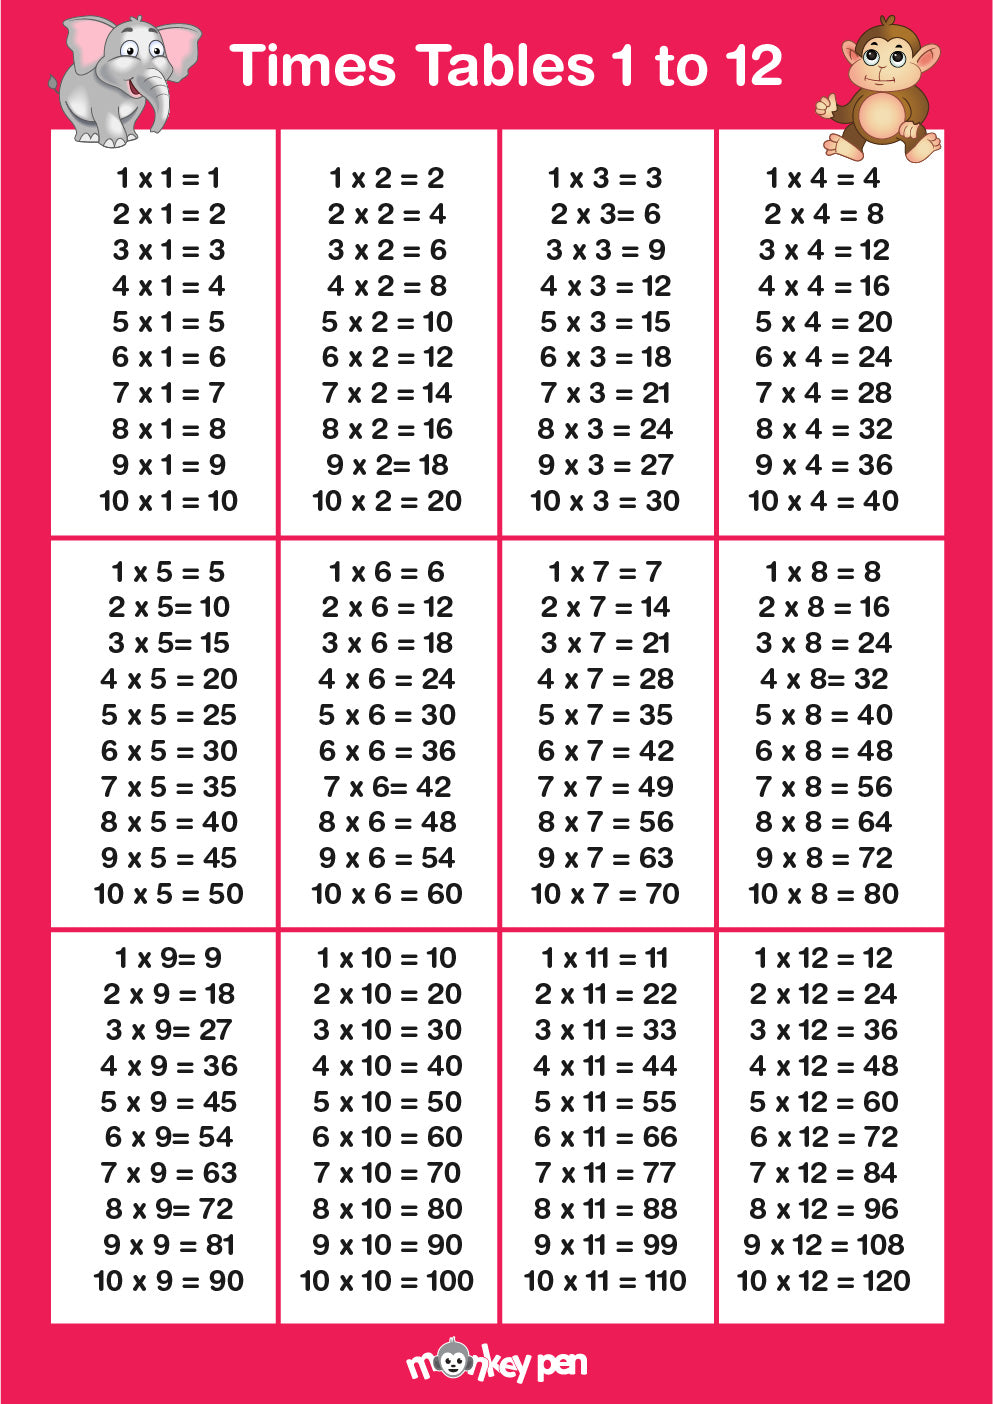 download free times table poster monkey pen store